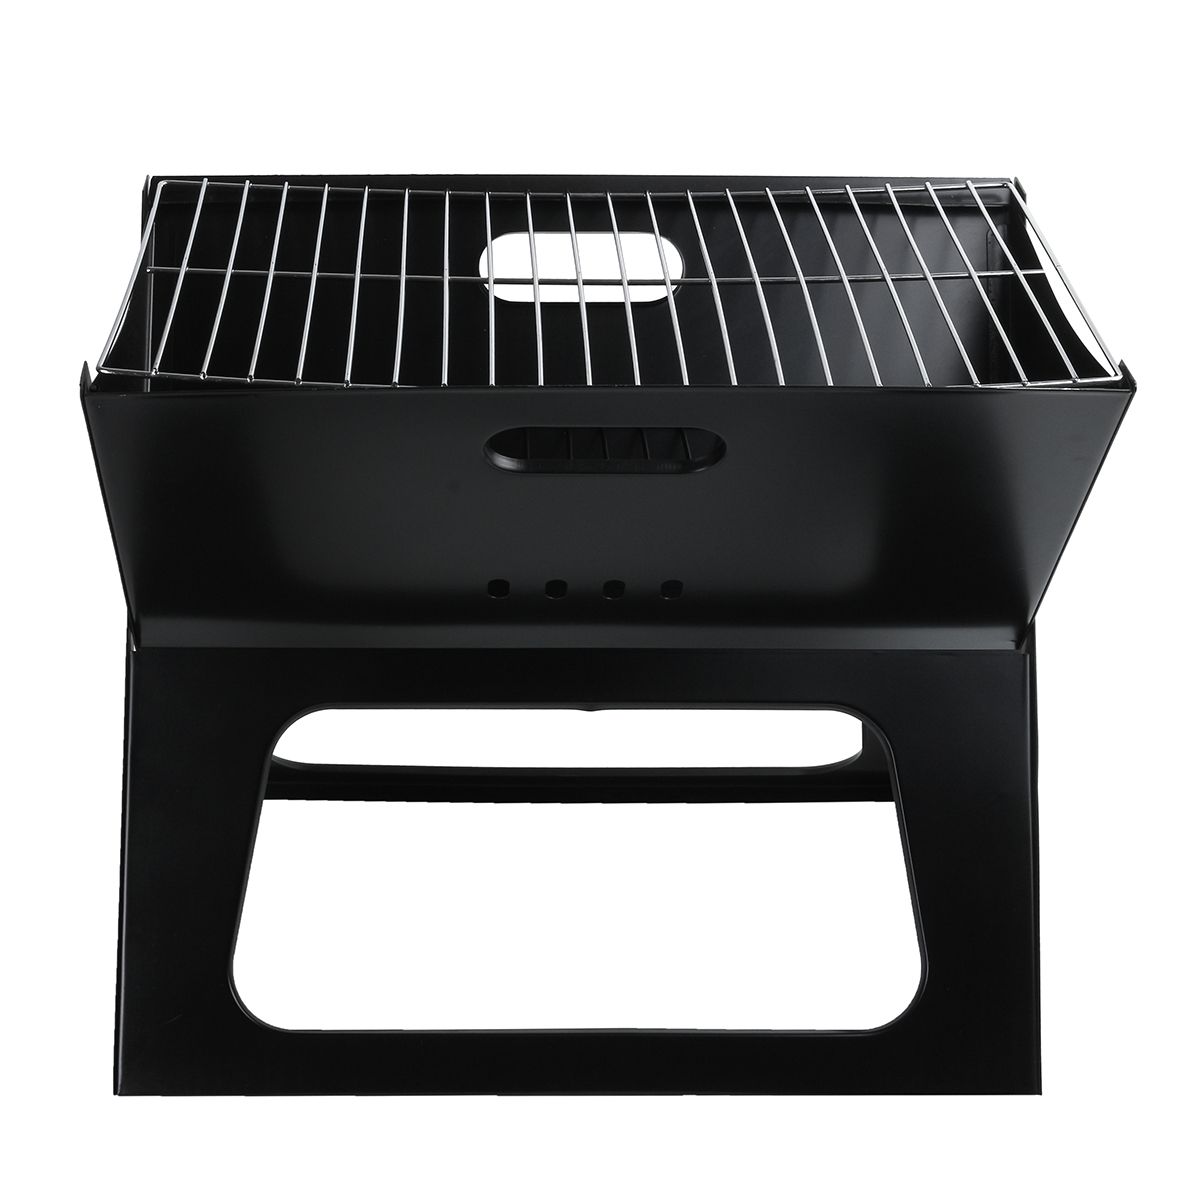 Large-Outdoor-Portable-Foldable-Folding-Charcoal-BBQ-Grill-Camping-Party-Picnic-1595317